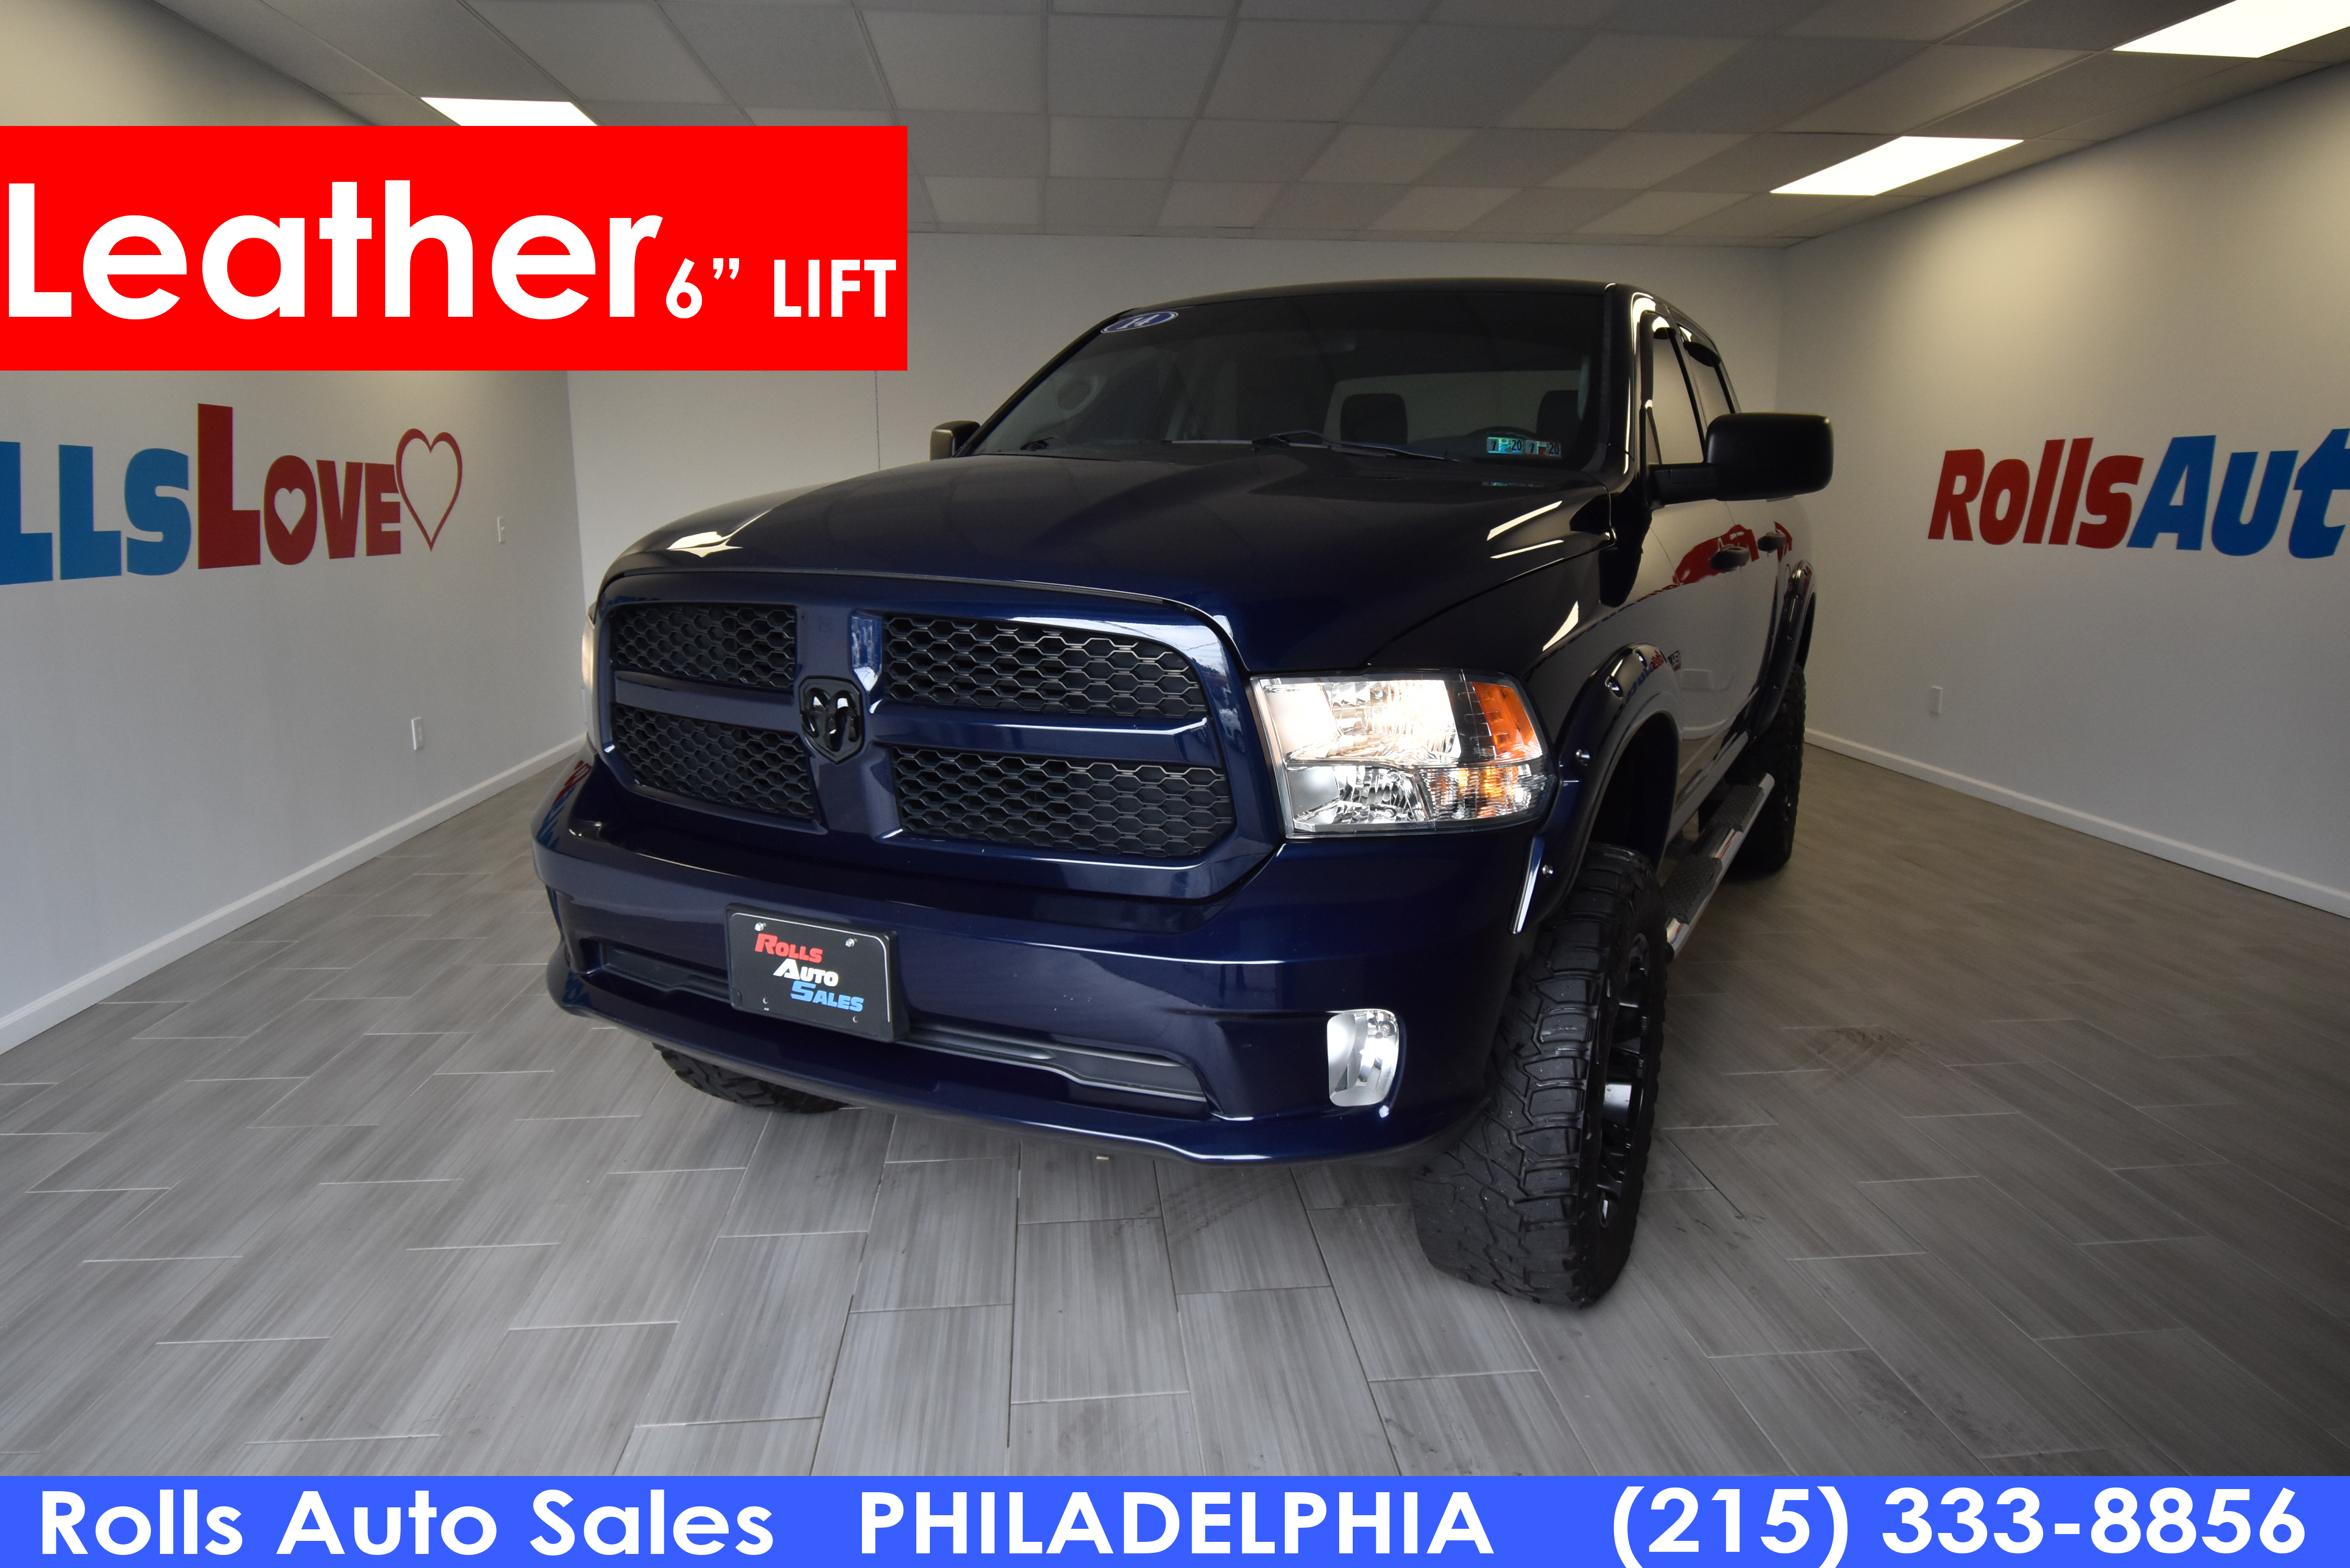 Pre Owned 2014 Dodge Ram 1500 Pickup V8 Crew Cab Express 4wd Four Wheel Drive Crew Pickup